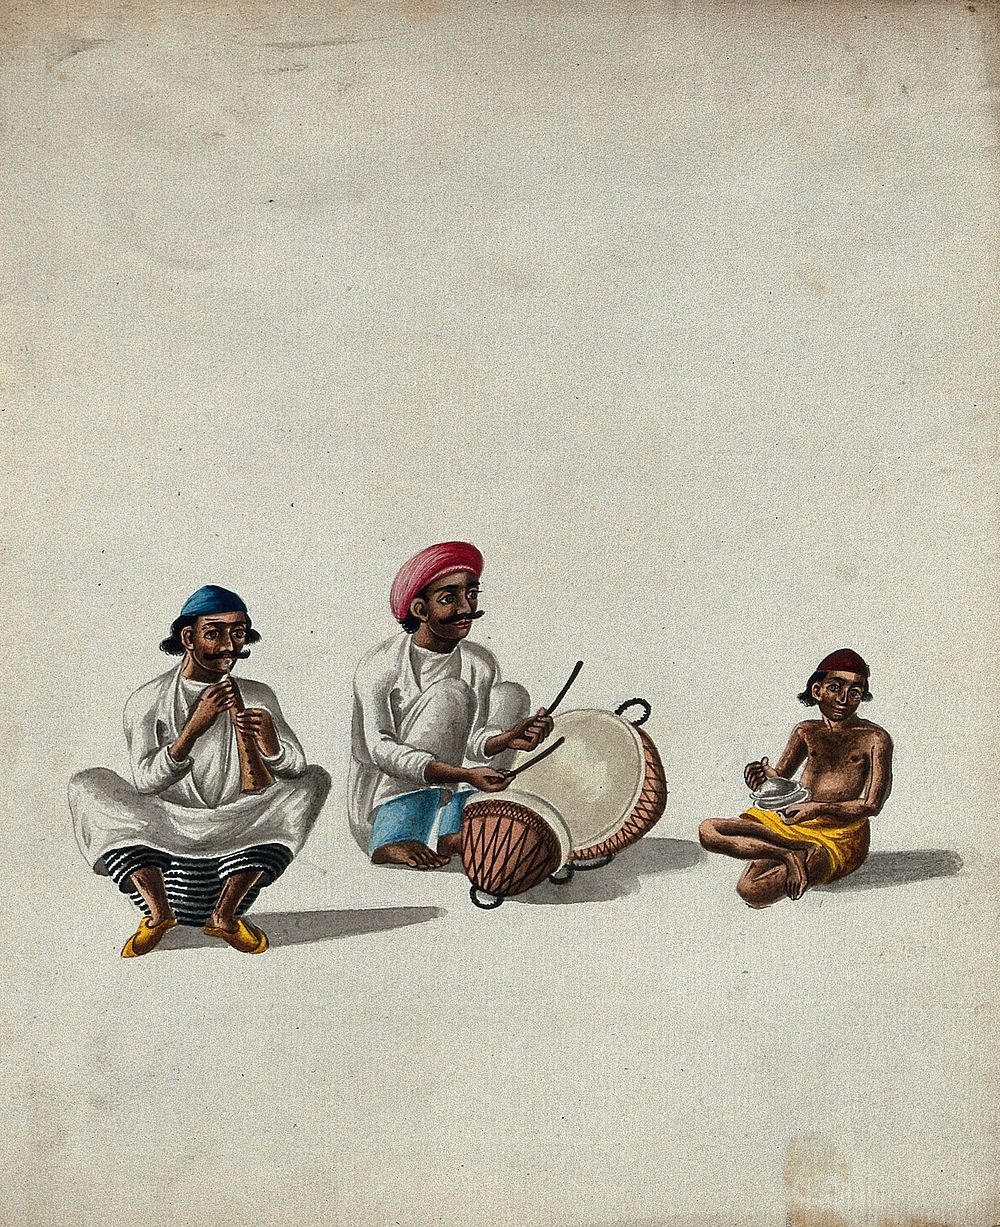 Three musicians sitting with their instruments. Gouache painting by an Indian artist.